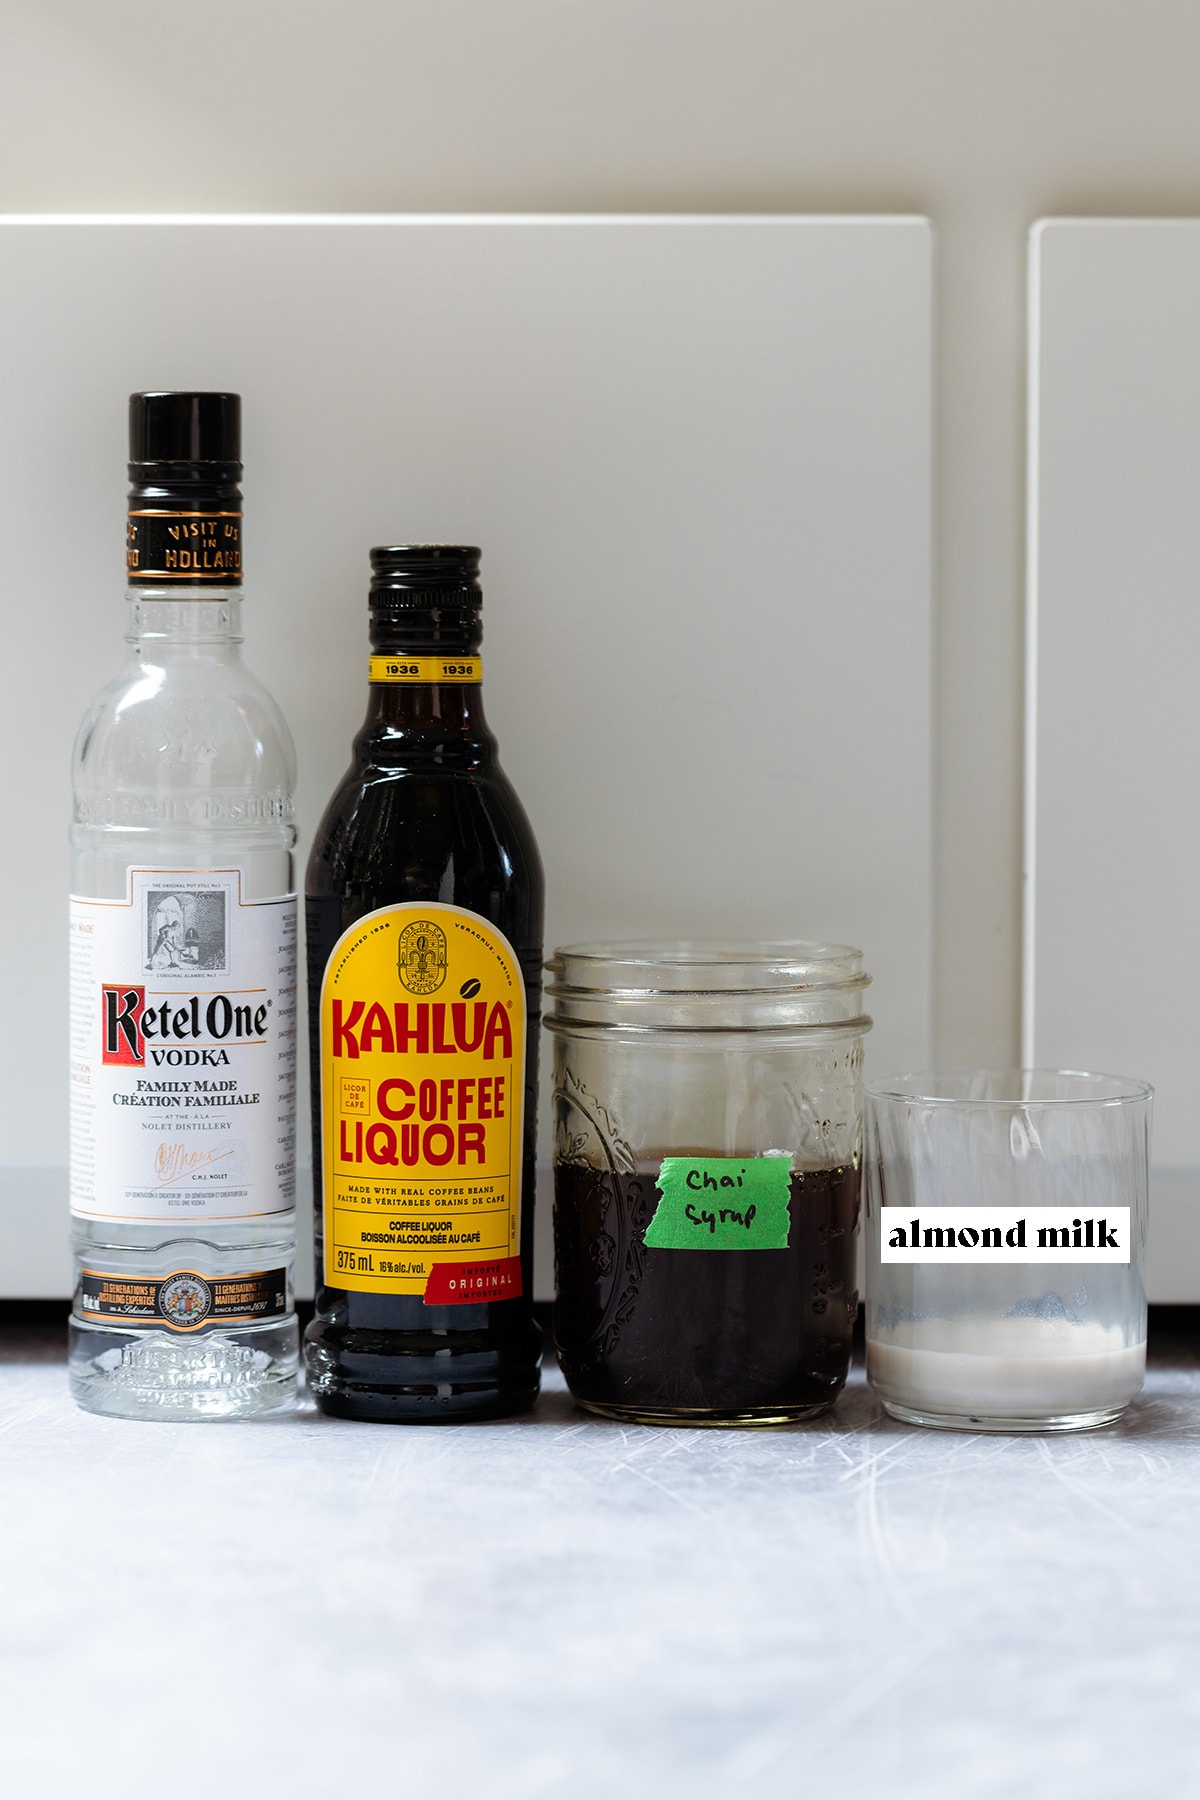 Vodka, Kahlua, chai syrup, and almond milk all on a white background.